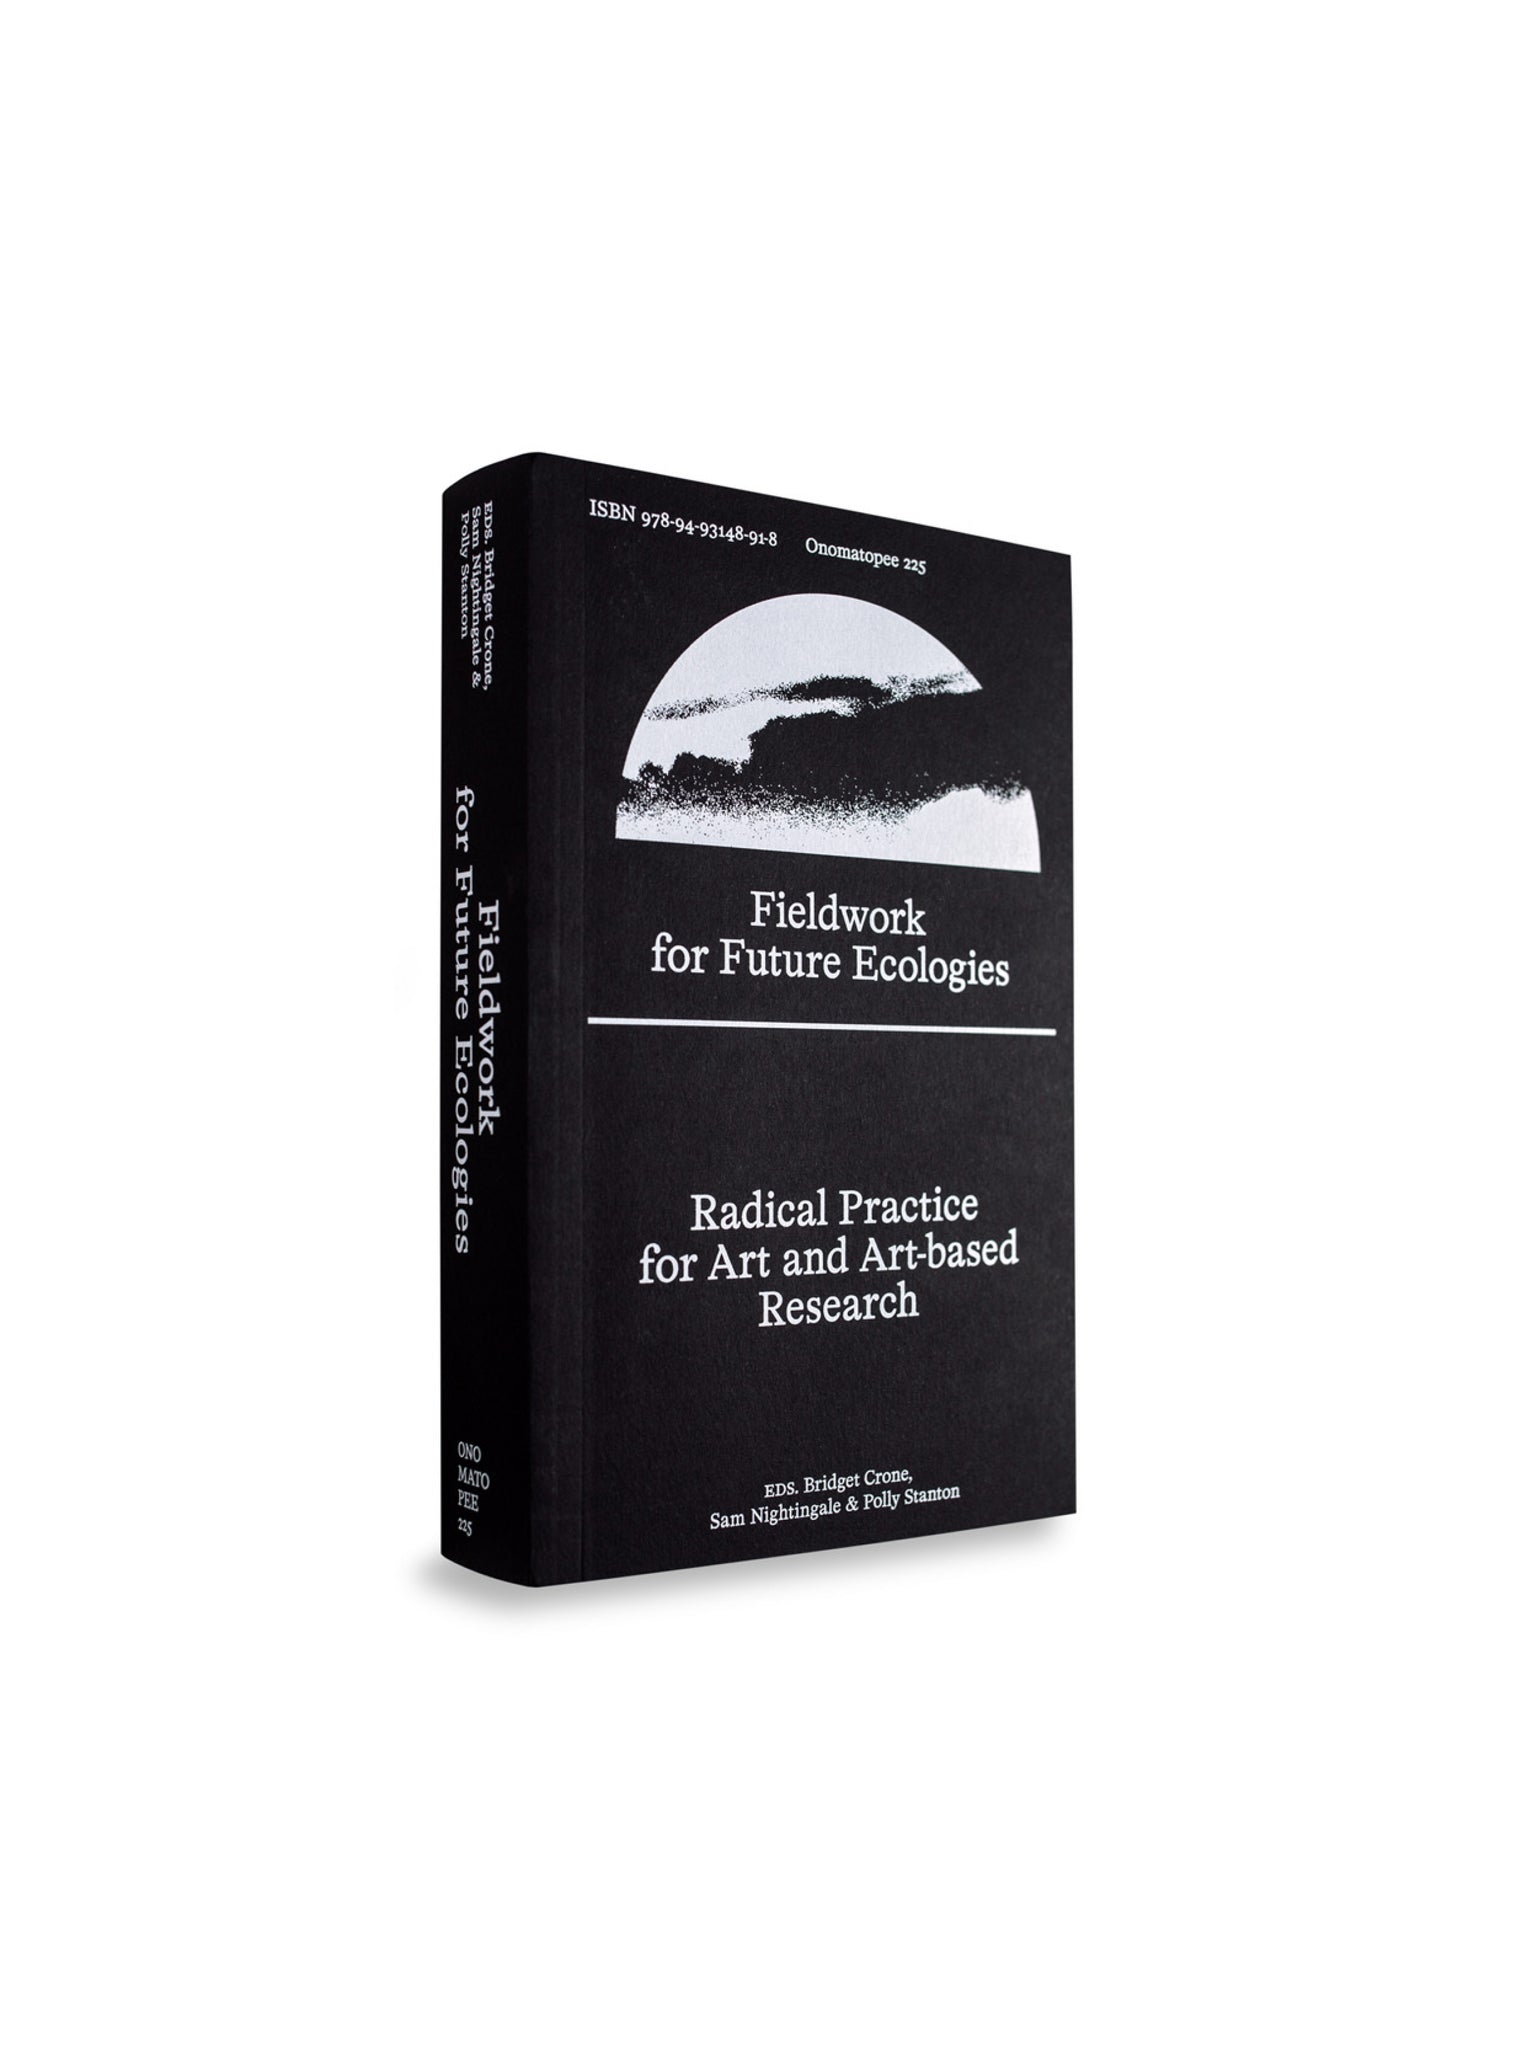 Fieldwork for Future Ecologies: Radical practice for art and art-based research